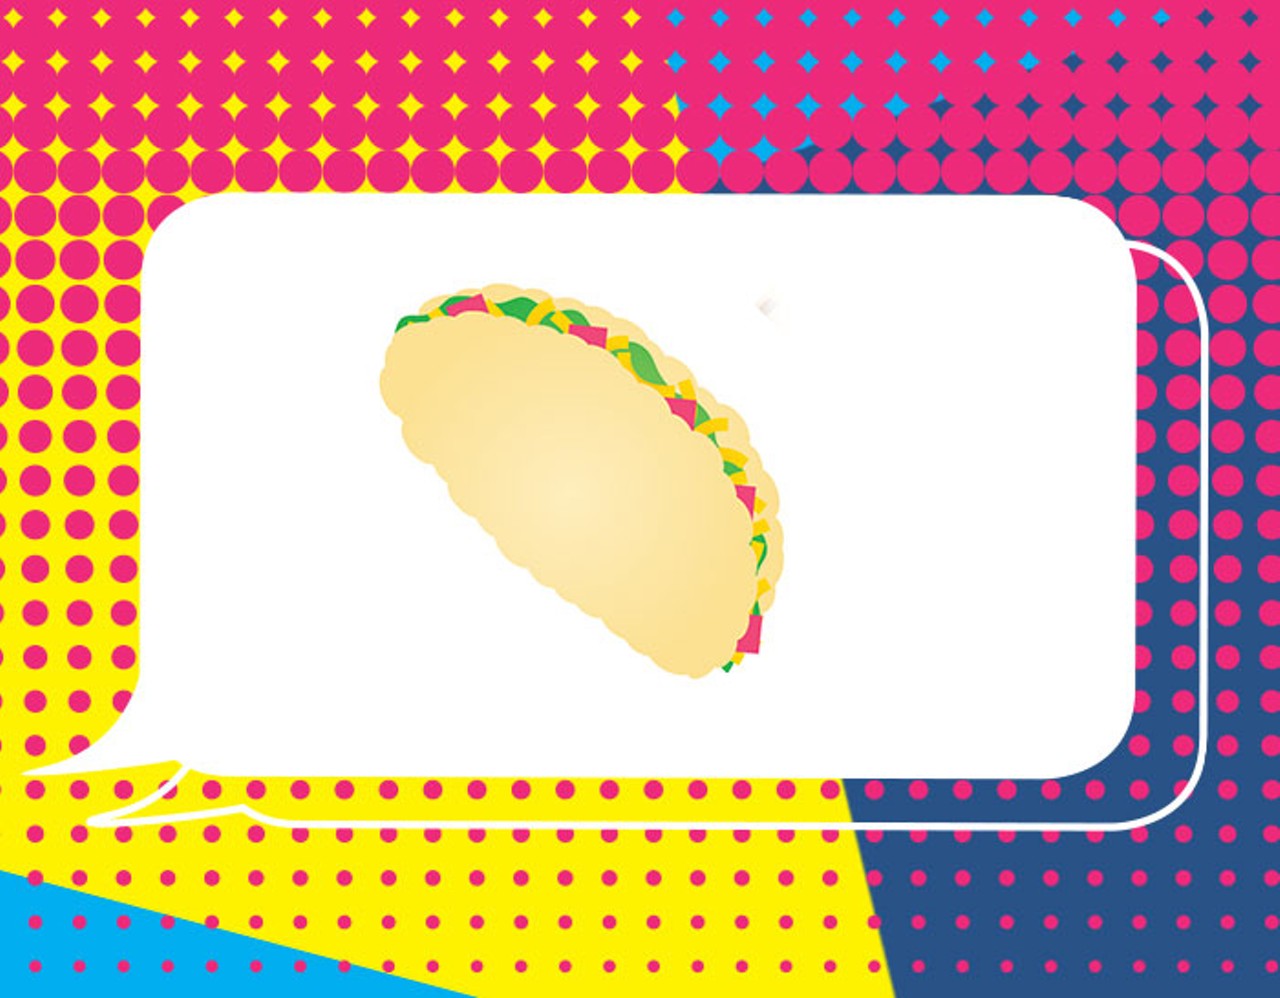 A Puffy Taco
When to use it: When the craving for Ray&#146;s Drive Inn, Henry&#146;s Puffy Tacos or Los Barrios kicks in. When you&#146;re feeling extra puro. When you&#146;re enjoying a puffy taco and want to make your friends wildly jealous. Use it at the Missions game as you&#146;re about to chase down Henry the Puffy Taco and need all the positive vibes you can get.